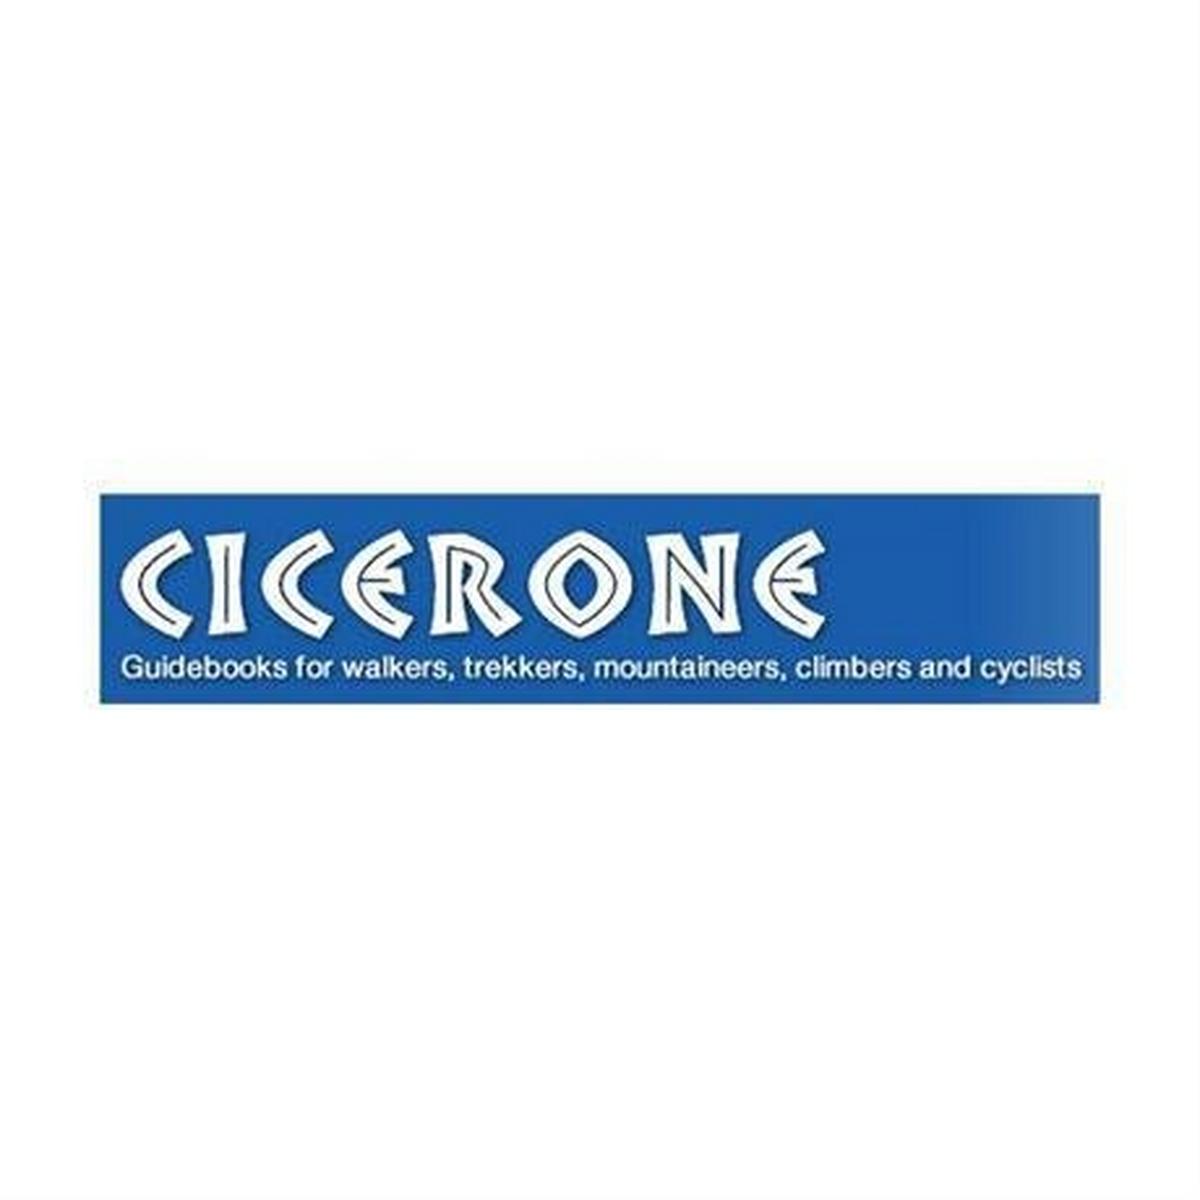 Cicerone Guide Book: Lake District: Low Level and Lake Walks